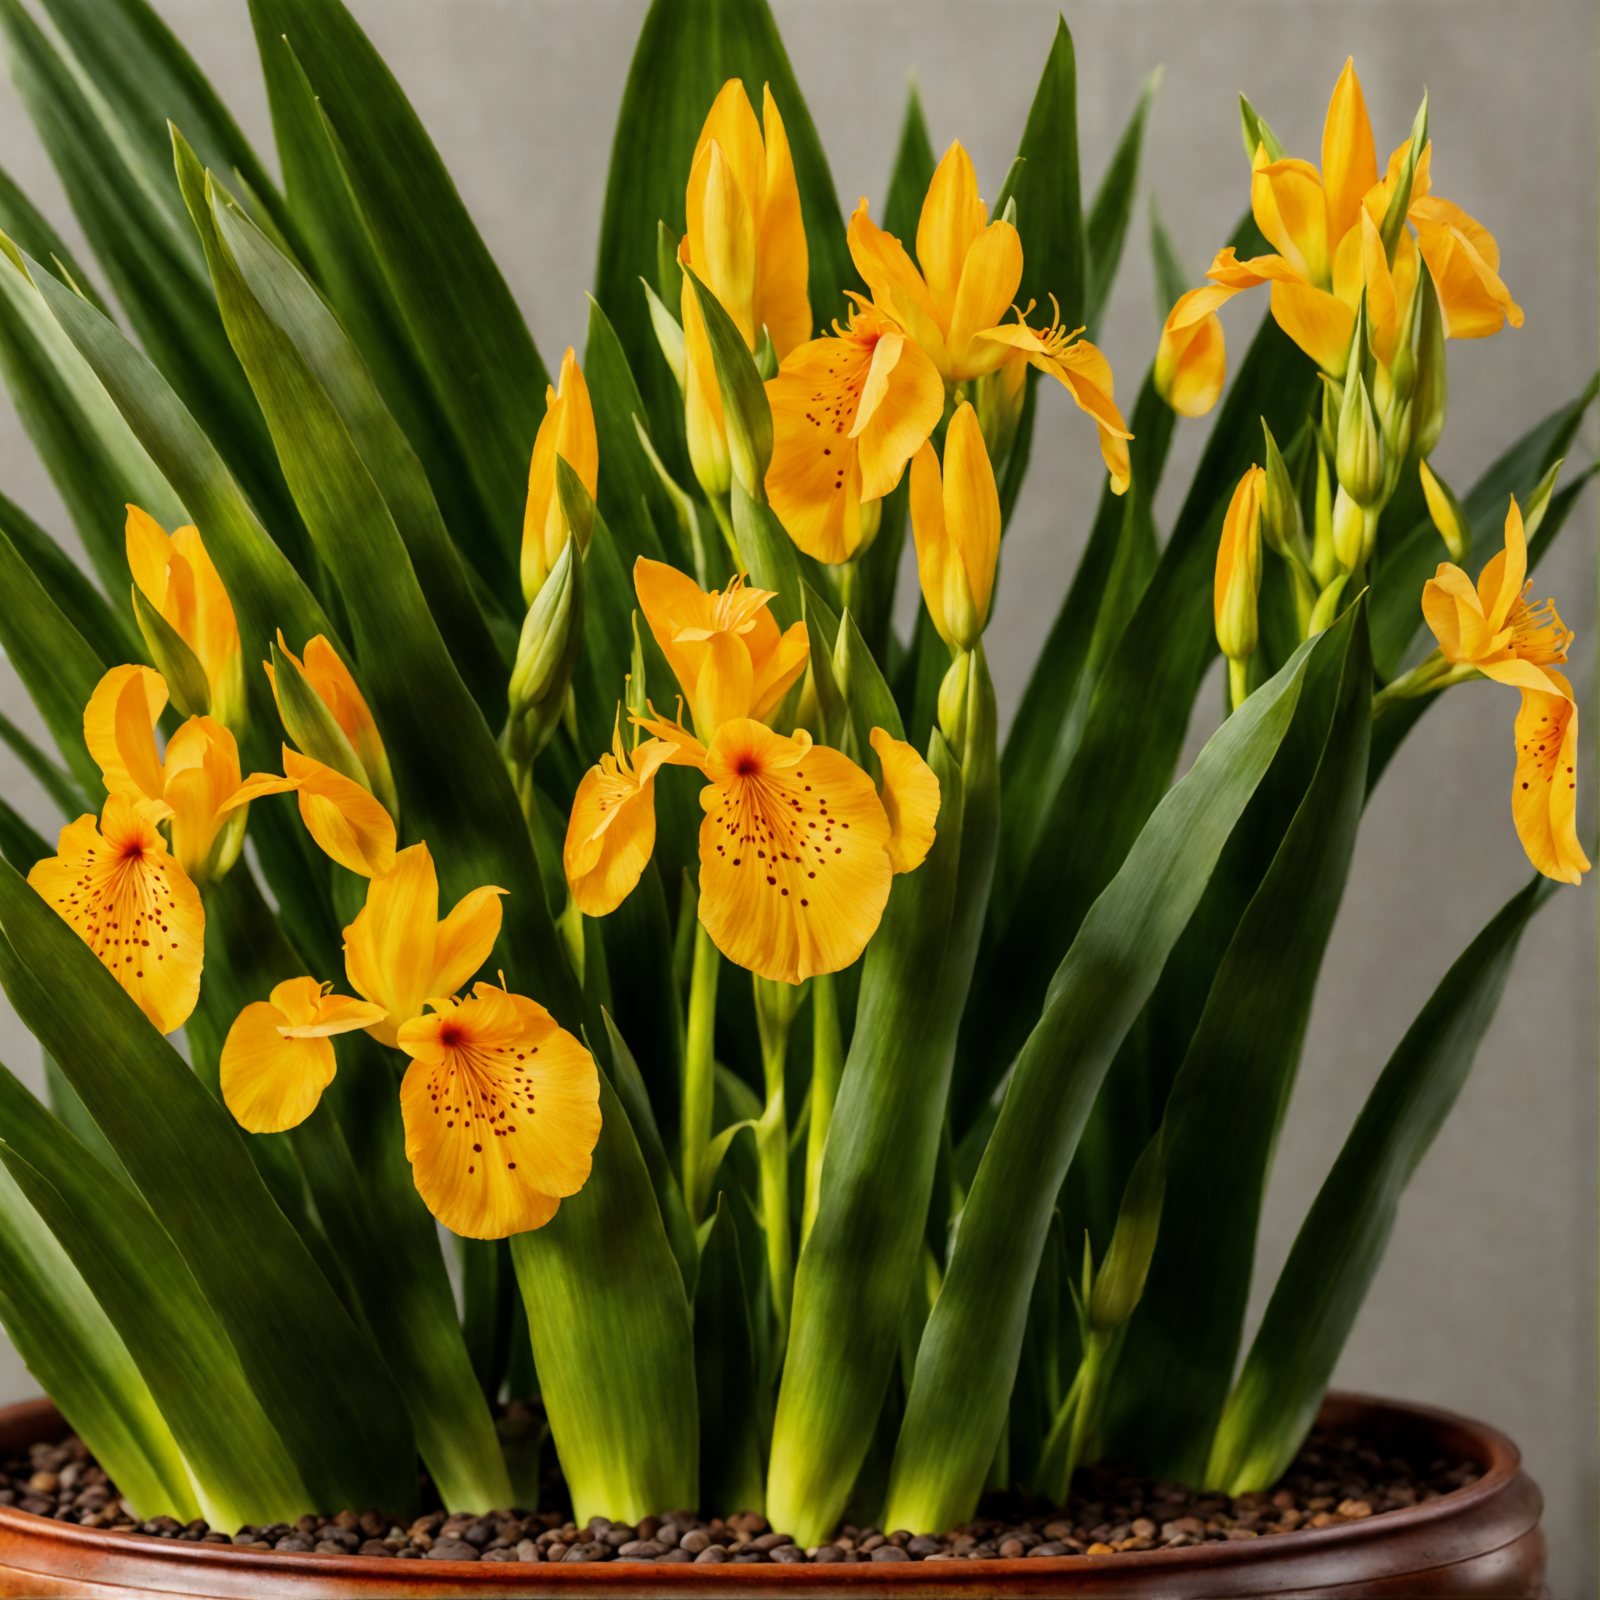 A highly detailed, hyper-realistic Iris pseudacorus with yellow flowers in a planter, against a dark background.